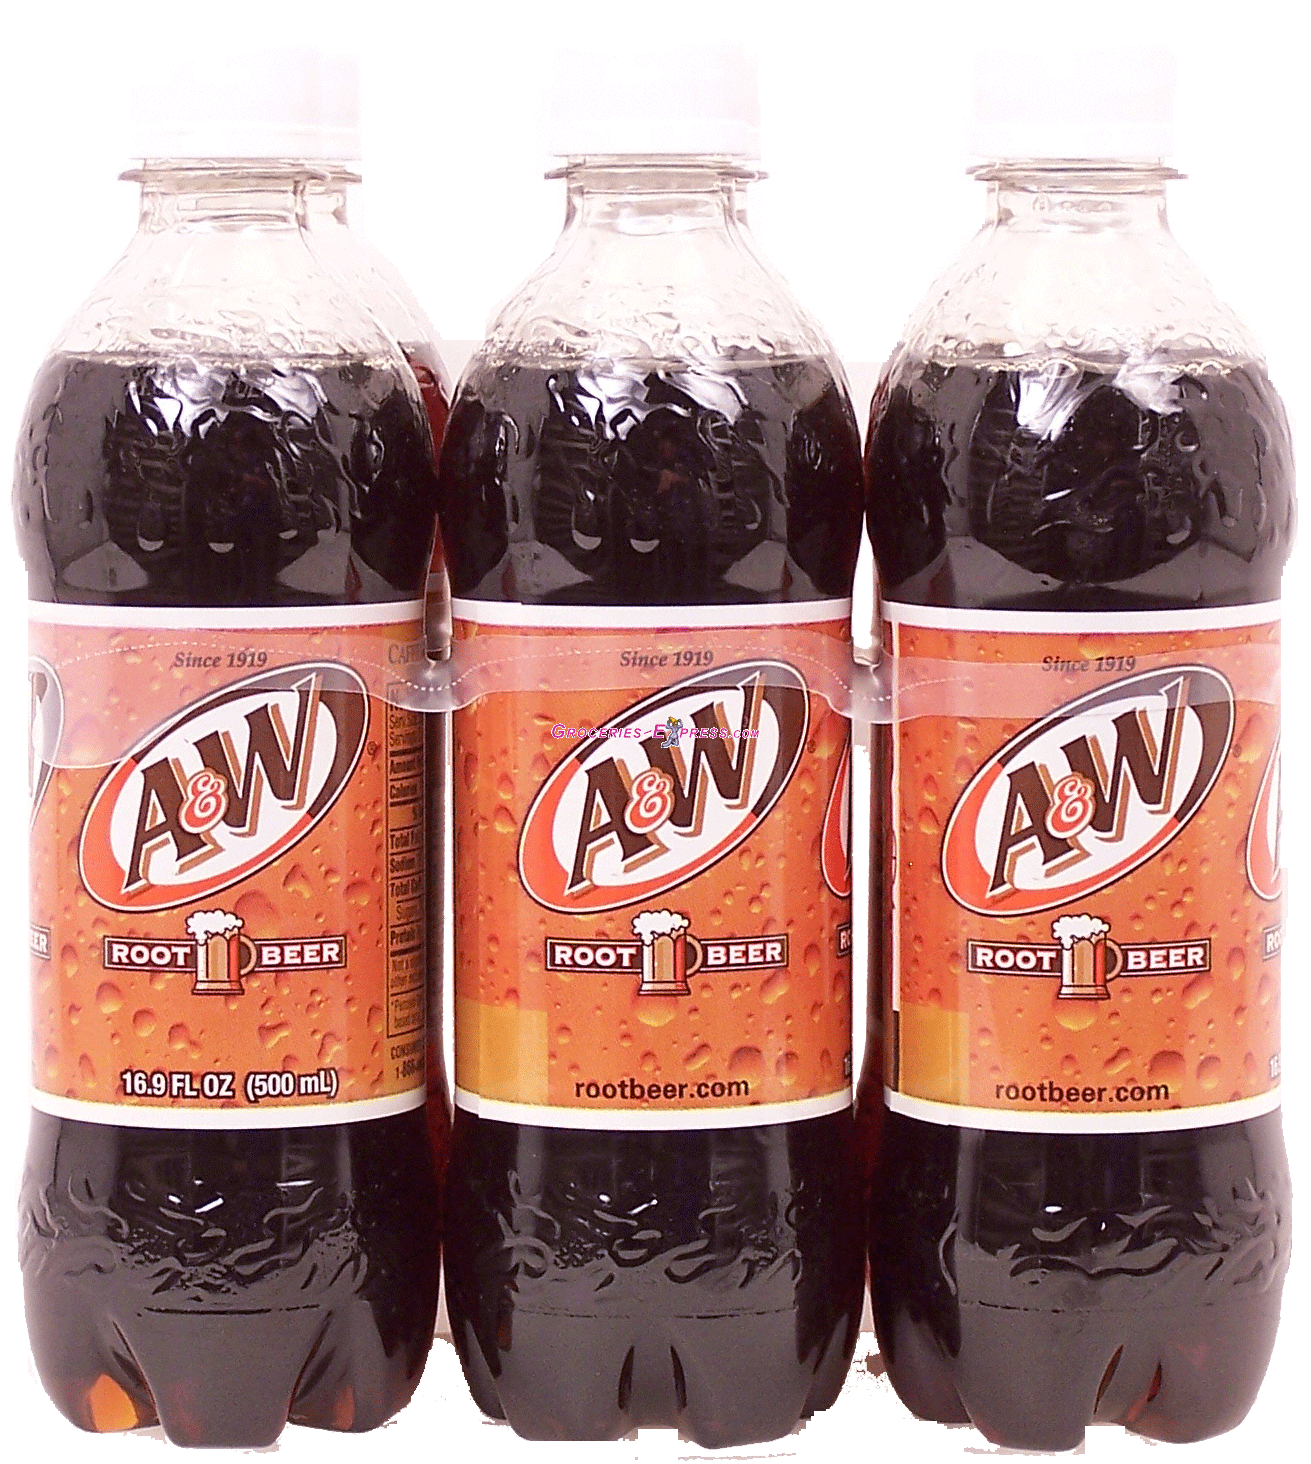 A & W  root beer, 6-pack 1/2 liter bottles Full-Size Picture